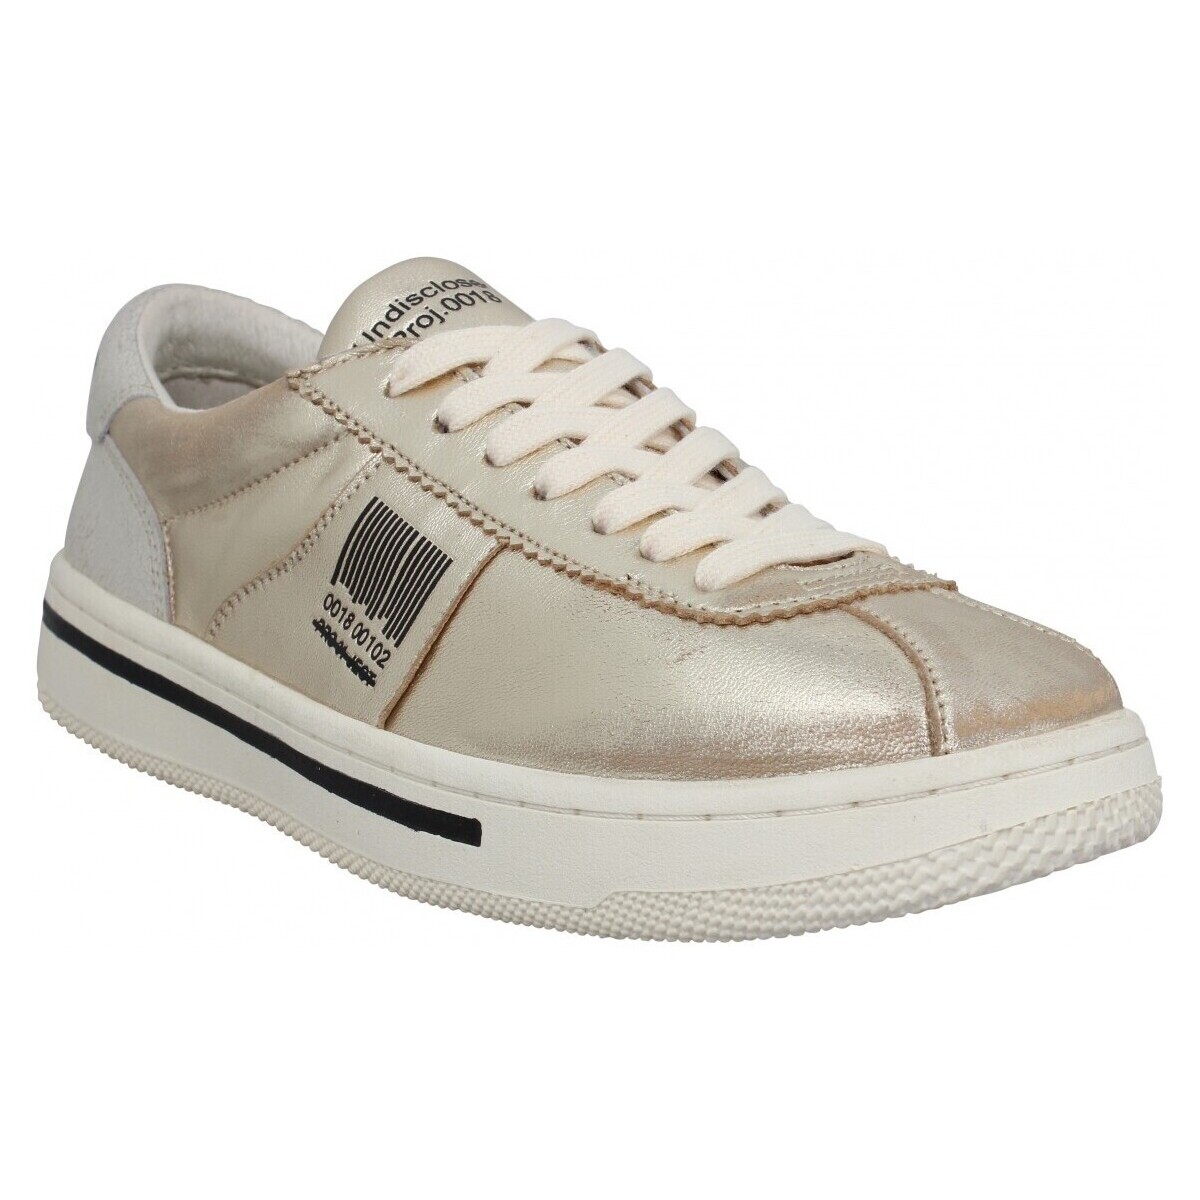 Pro 01 Ject  Sneakers Pro 01 Ject P5lw Cuir Laminated Femme Platinium